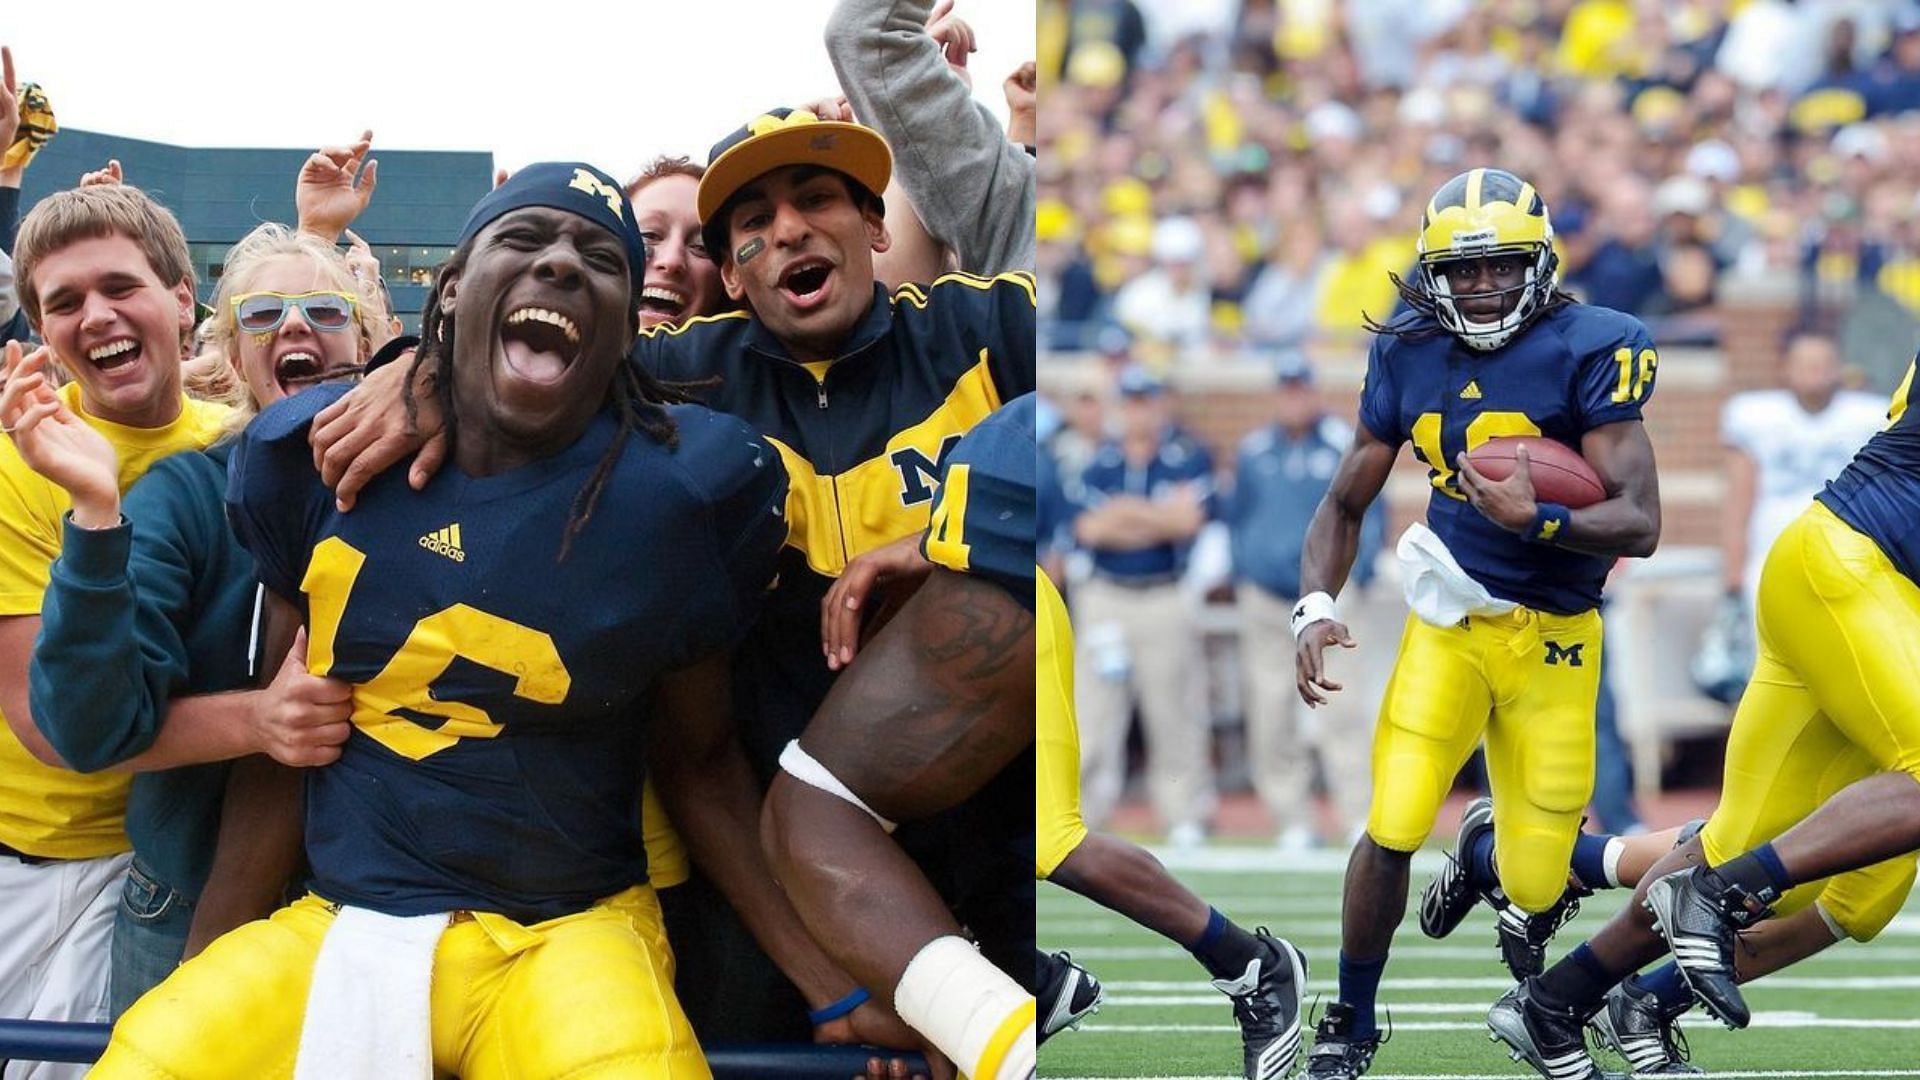 Denard Robinson is no longer with the Wolverines coaching staff